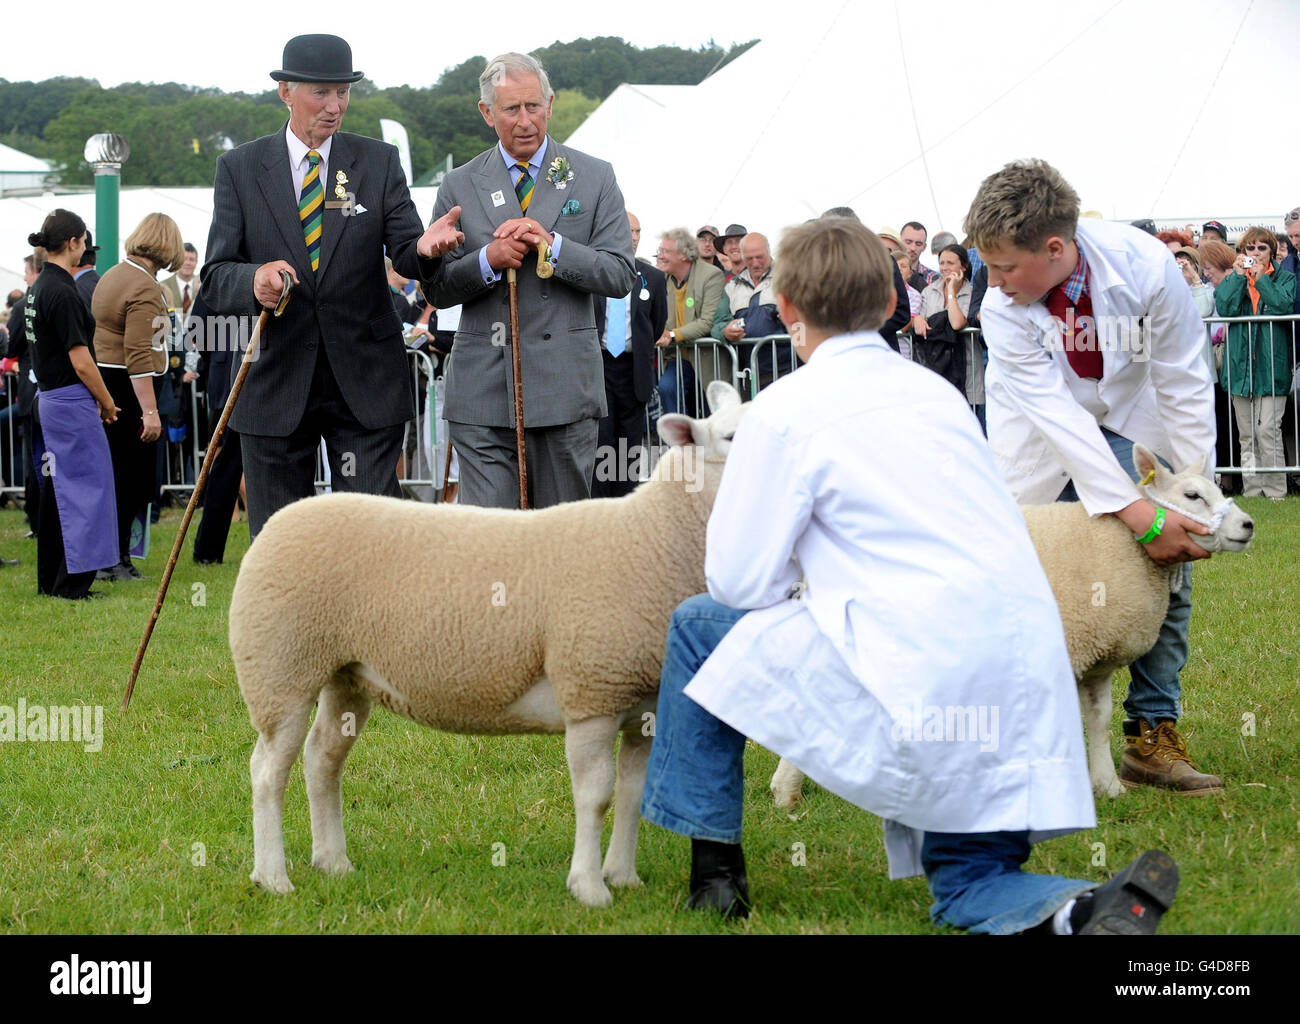 The Prince of Wales (right) talks to Chief Sheep Steward Henry Watson as they view the young sheep handlers during a visit to The Great Yorkshire Show in Harrogate. Stock Photo